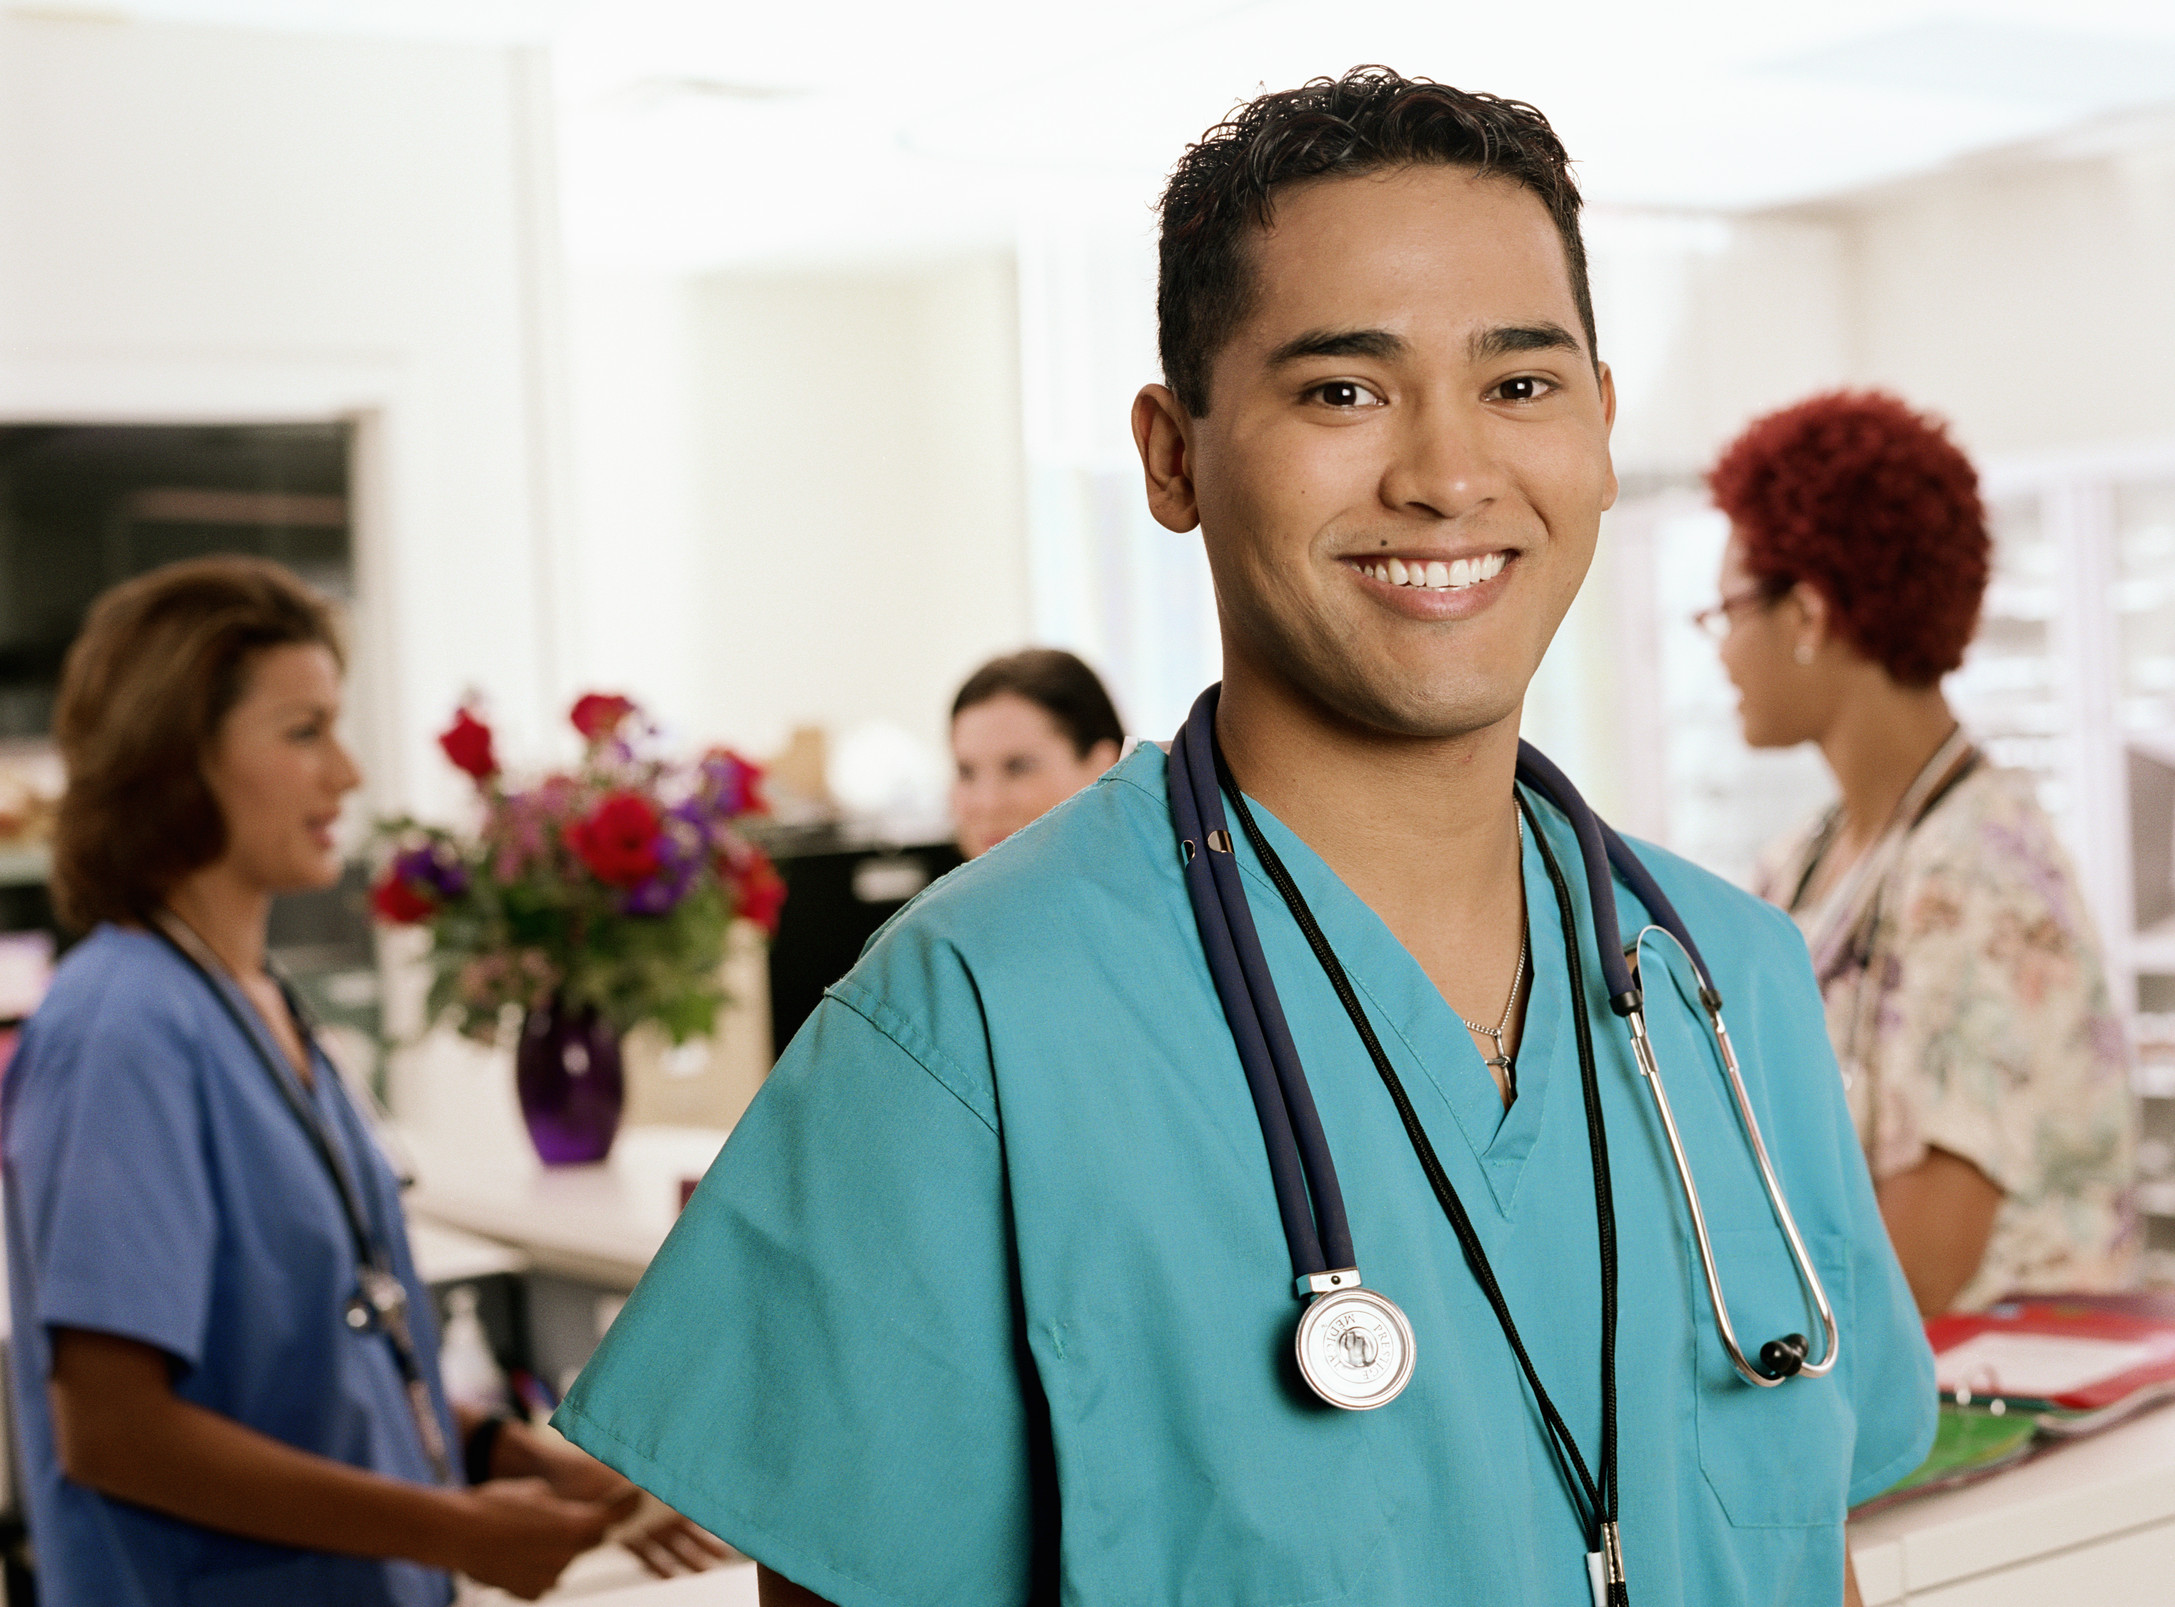 Why Men Should Consider Joining the Nursing Field